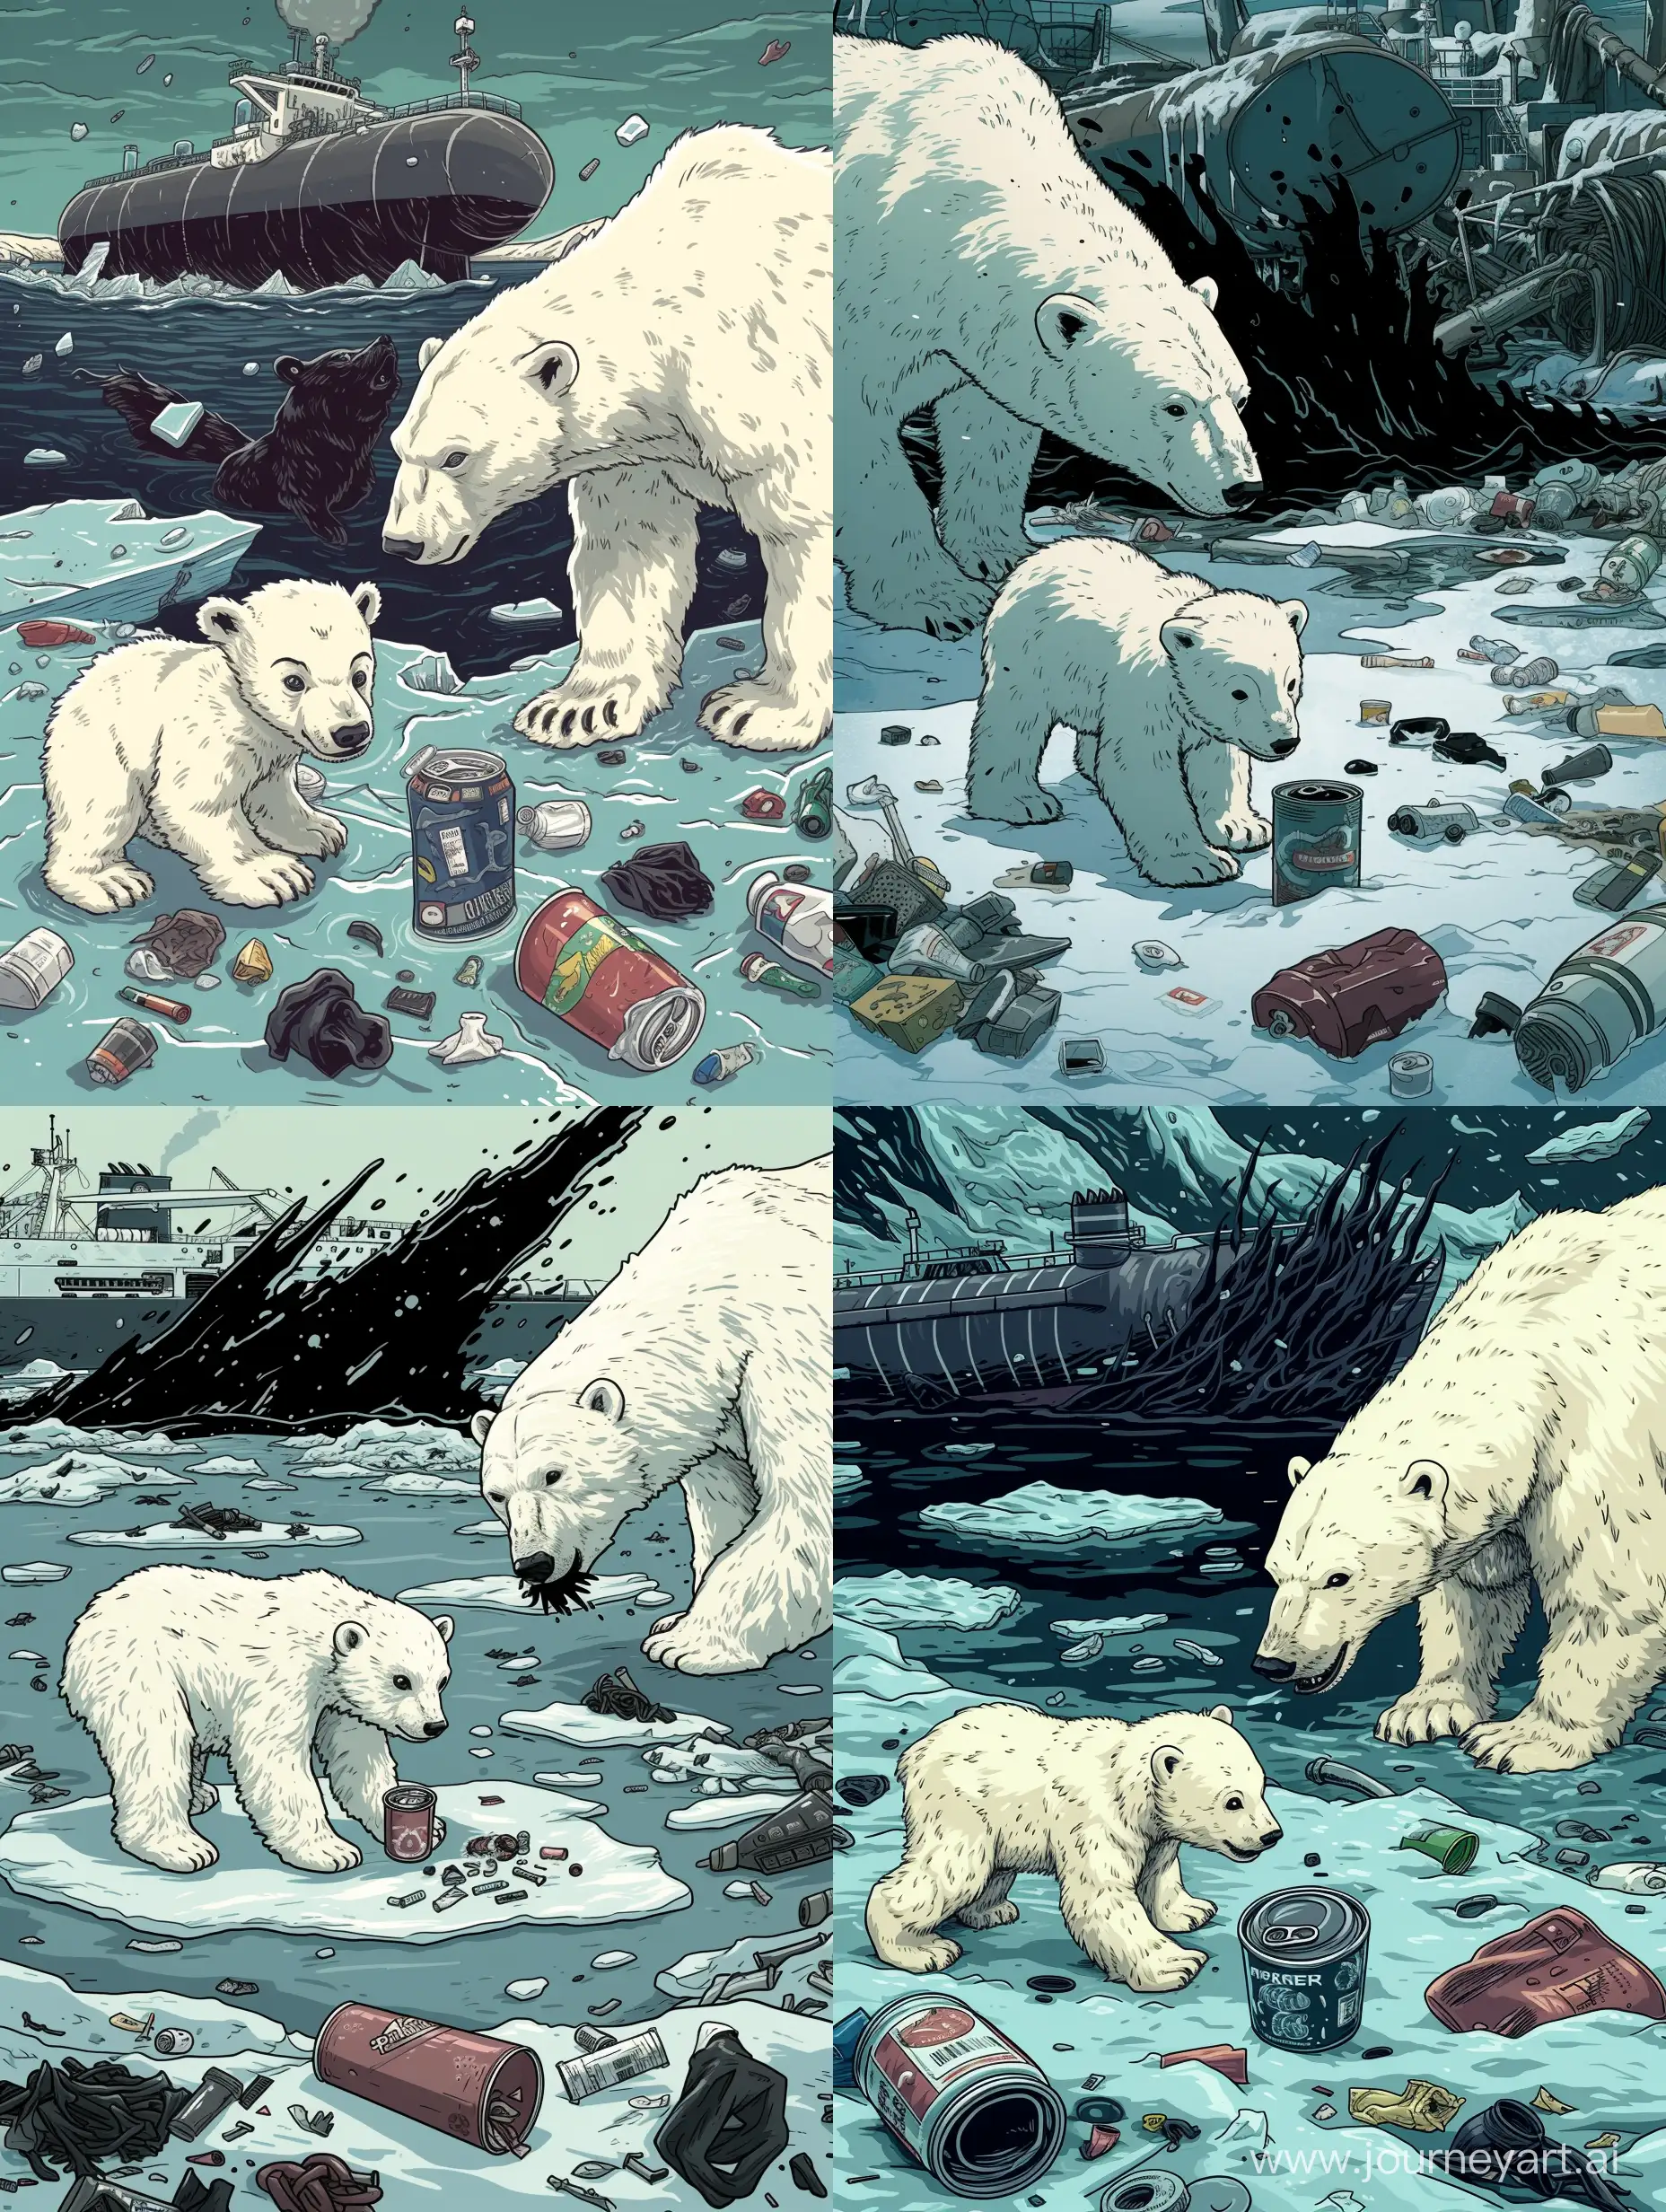 In foreground, a cub polar bear playing with a can. A mother polar bear is lookin desesperatly to him. surrounded by ice floe with trash spread. In background, a terrifying tanker, sinking, losing black would in water. Post-apocalyptic atmosphere. Realistic anime style with black outlines and flat painted colors.